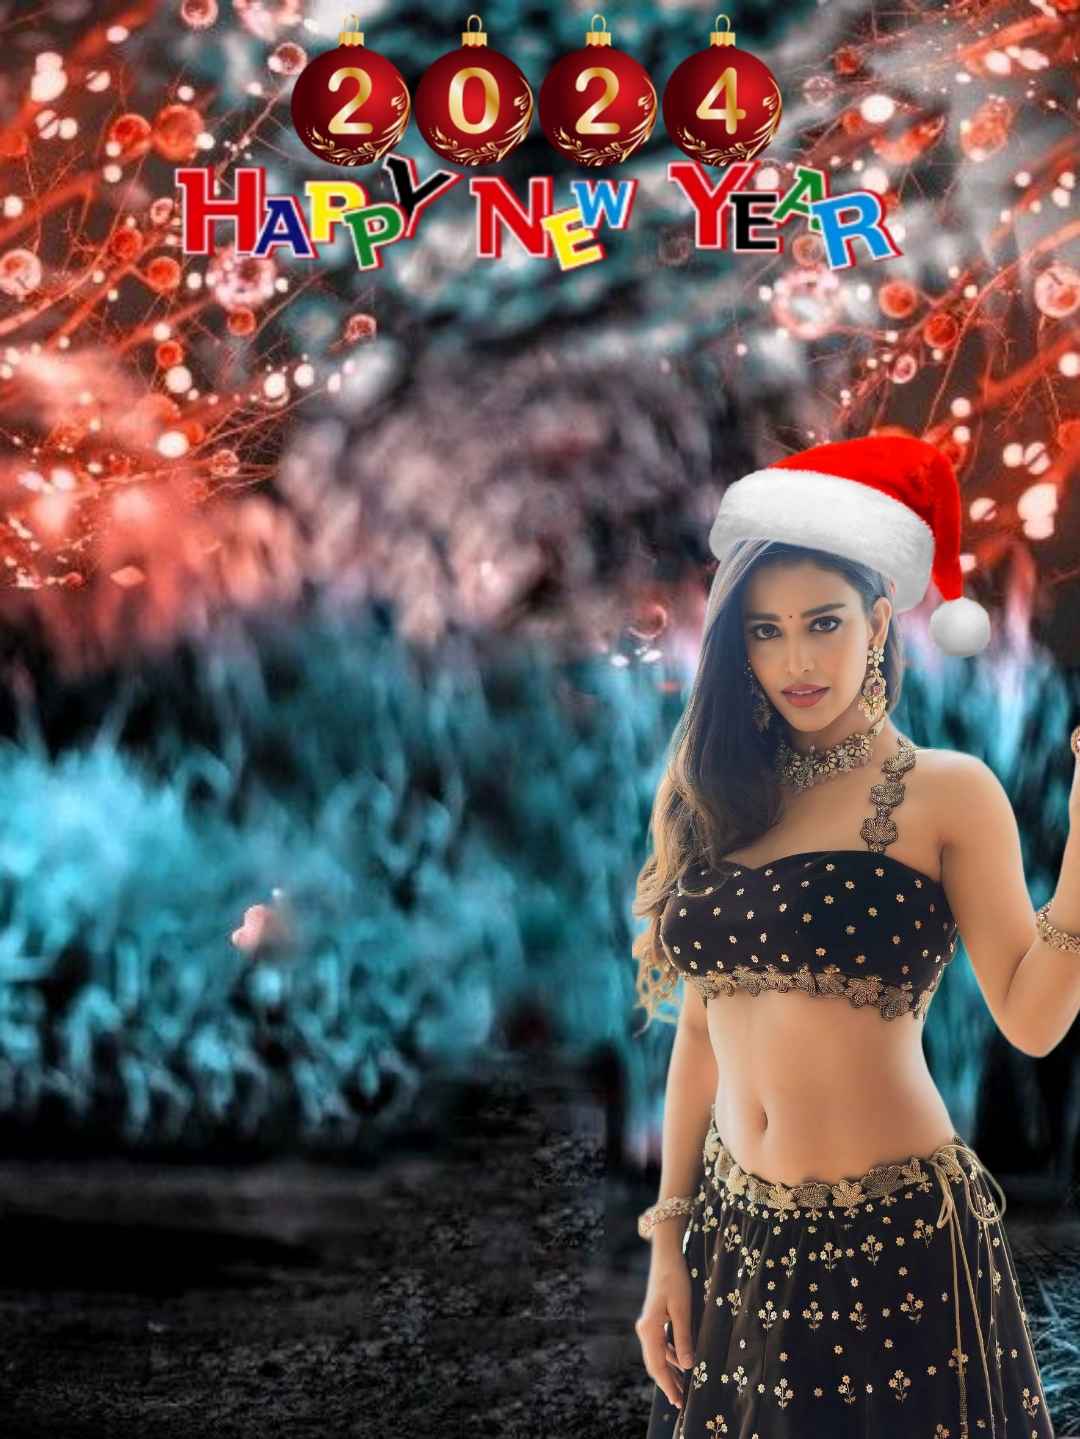 Girl CB Background Image for New Year